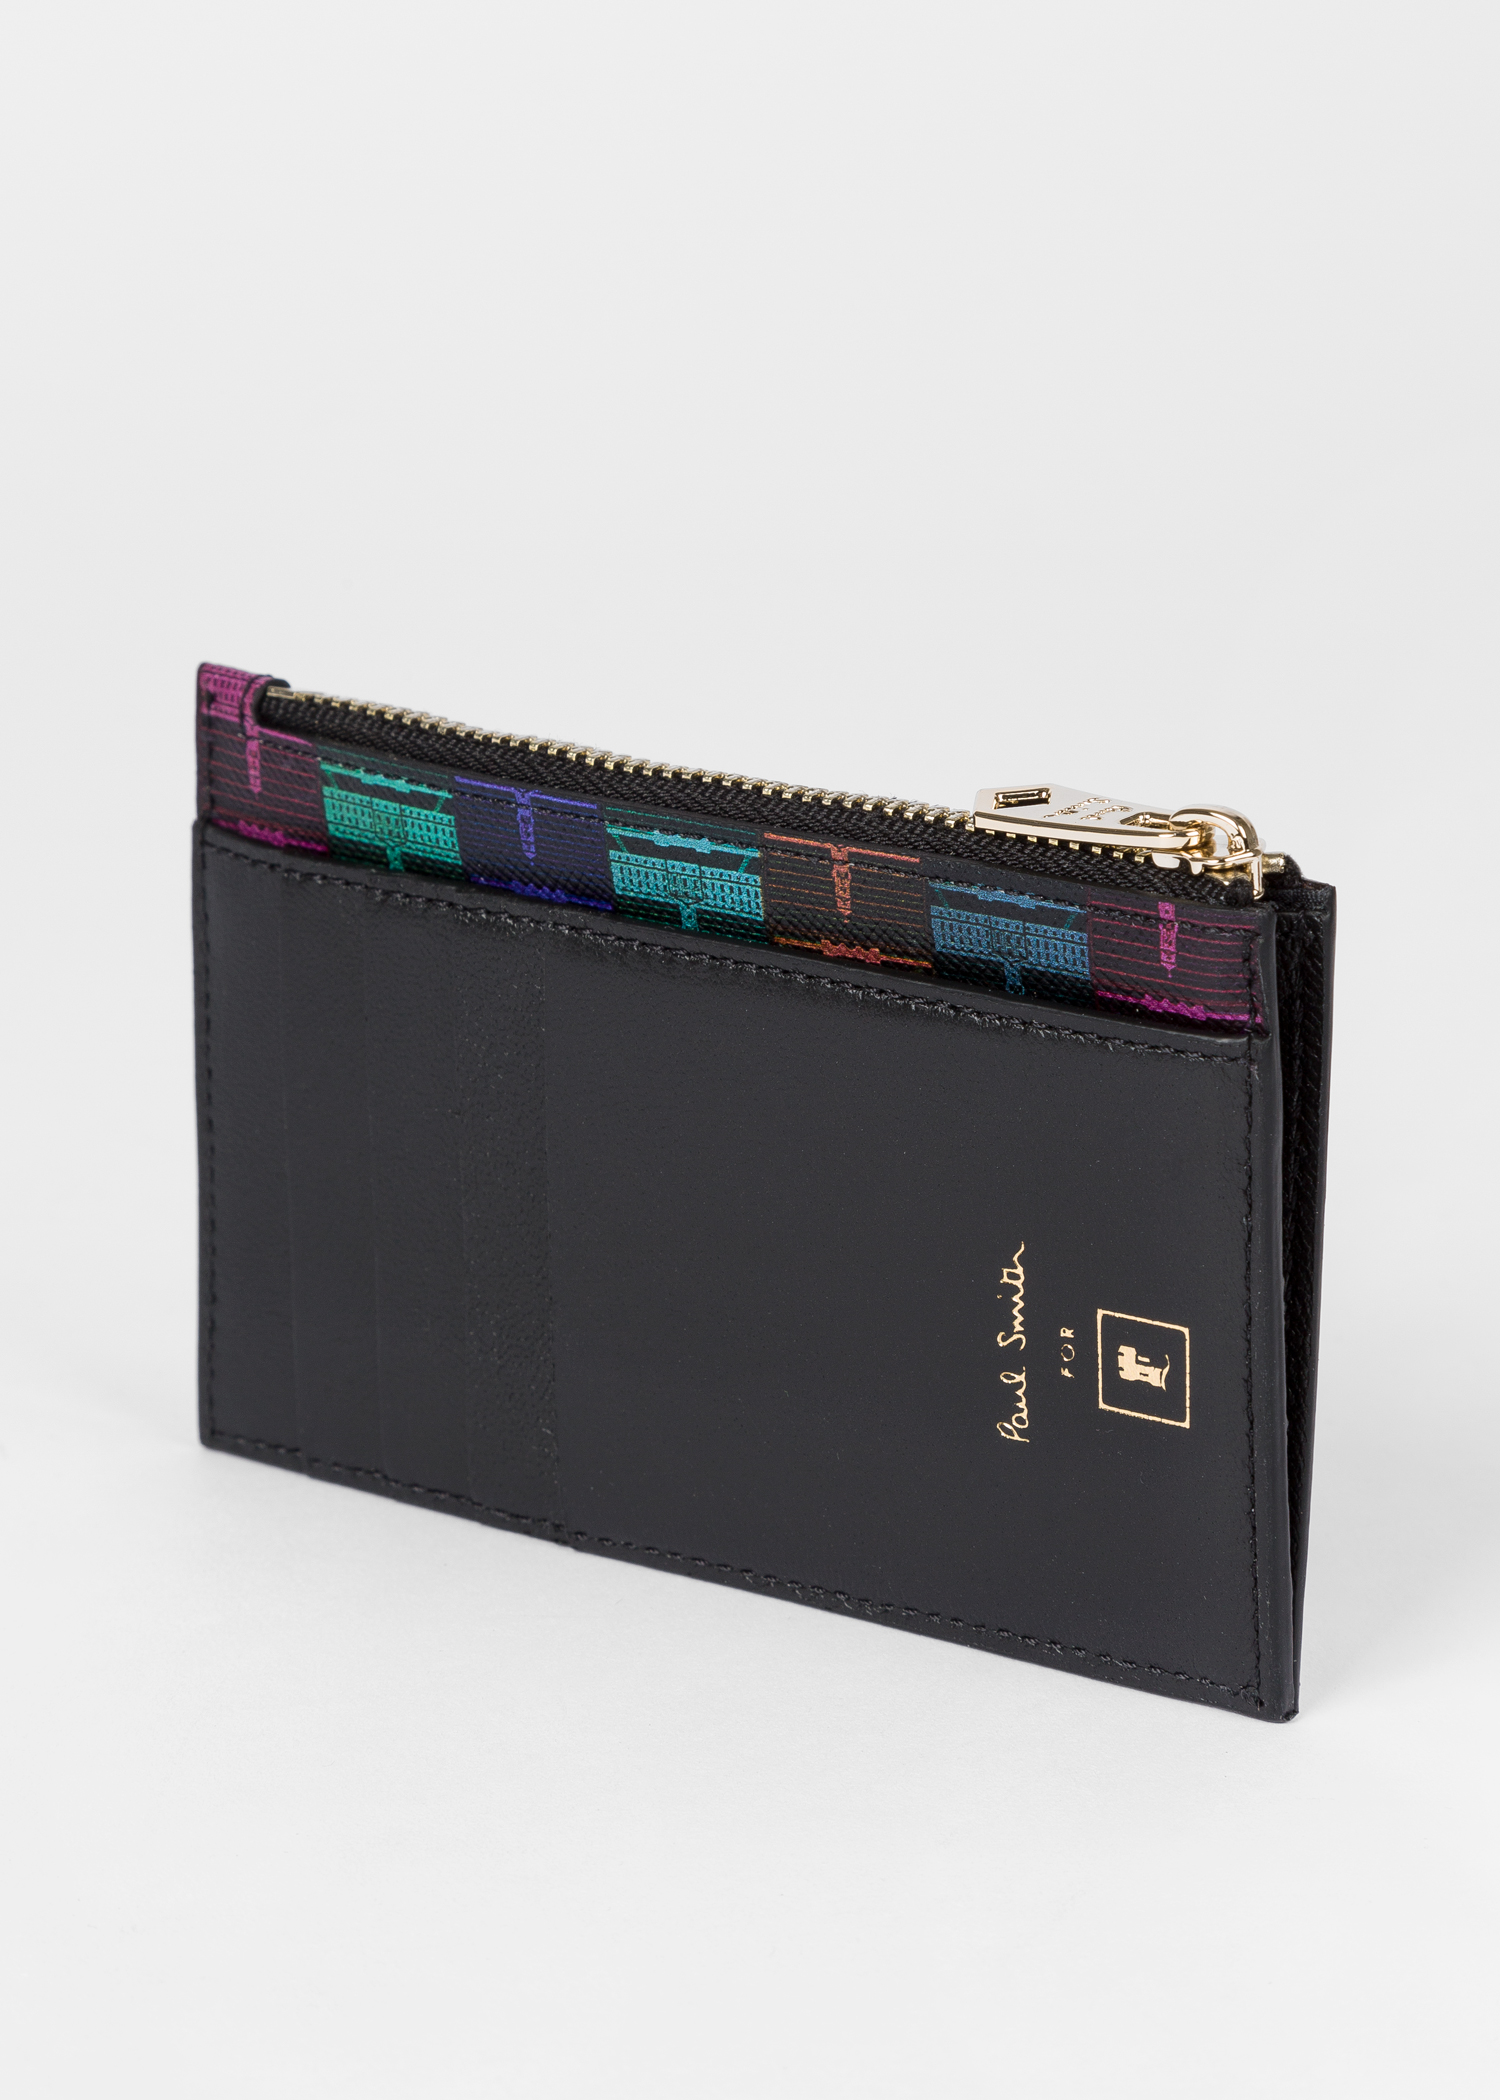 Angled view - Paul Smith For University Of Nottingham - Black 'Trent Building' Leather Zip Pouch Paul Smith